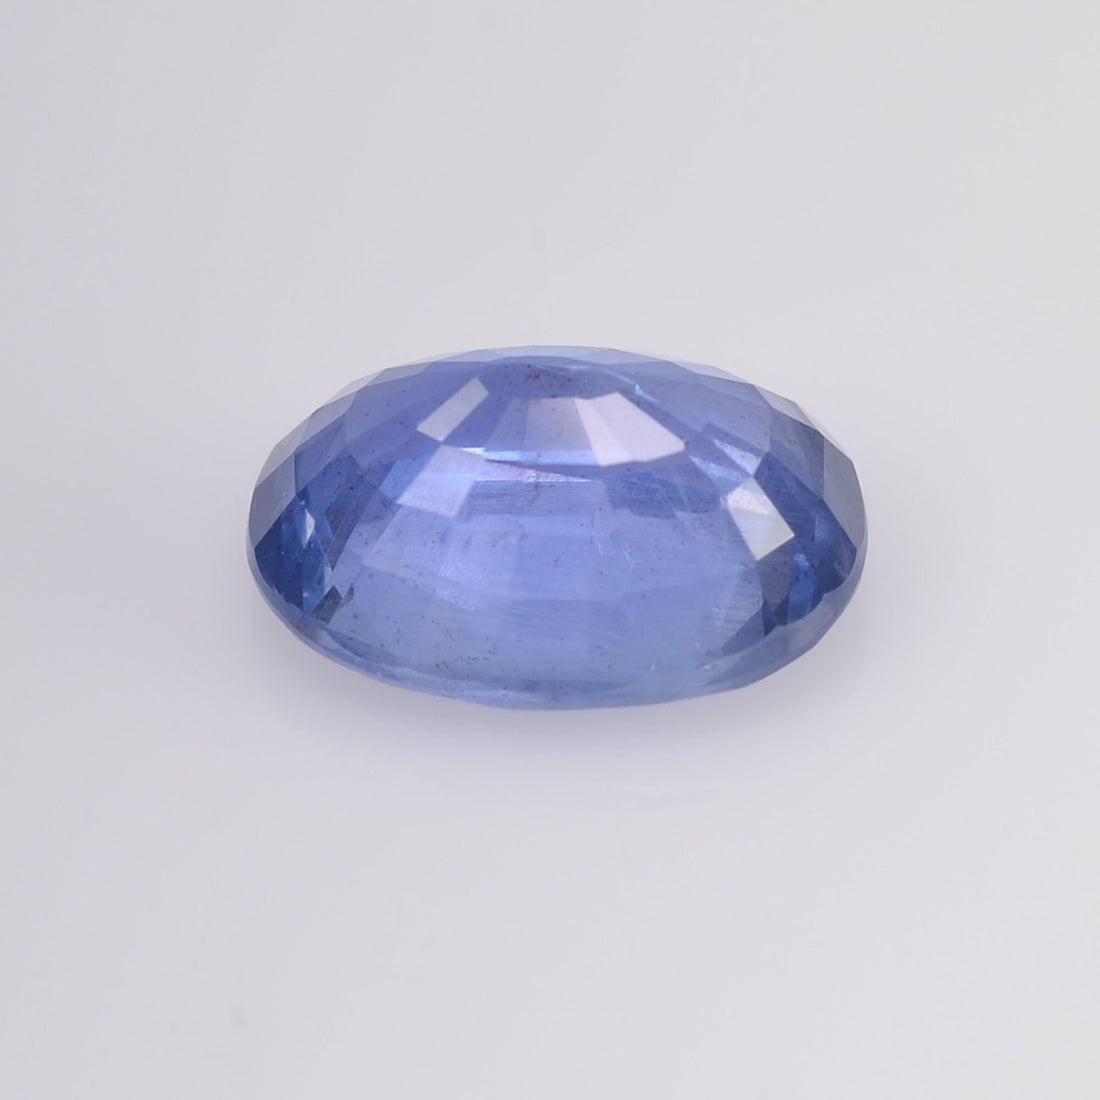 2.03 cts Unheated Natural Blue Sapphire Loose Gemstone Oval Cut Certified